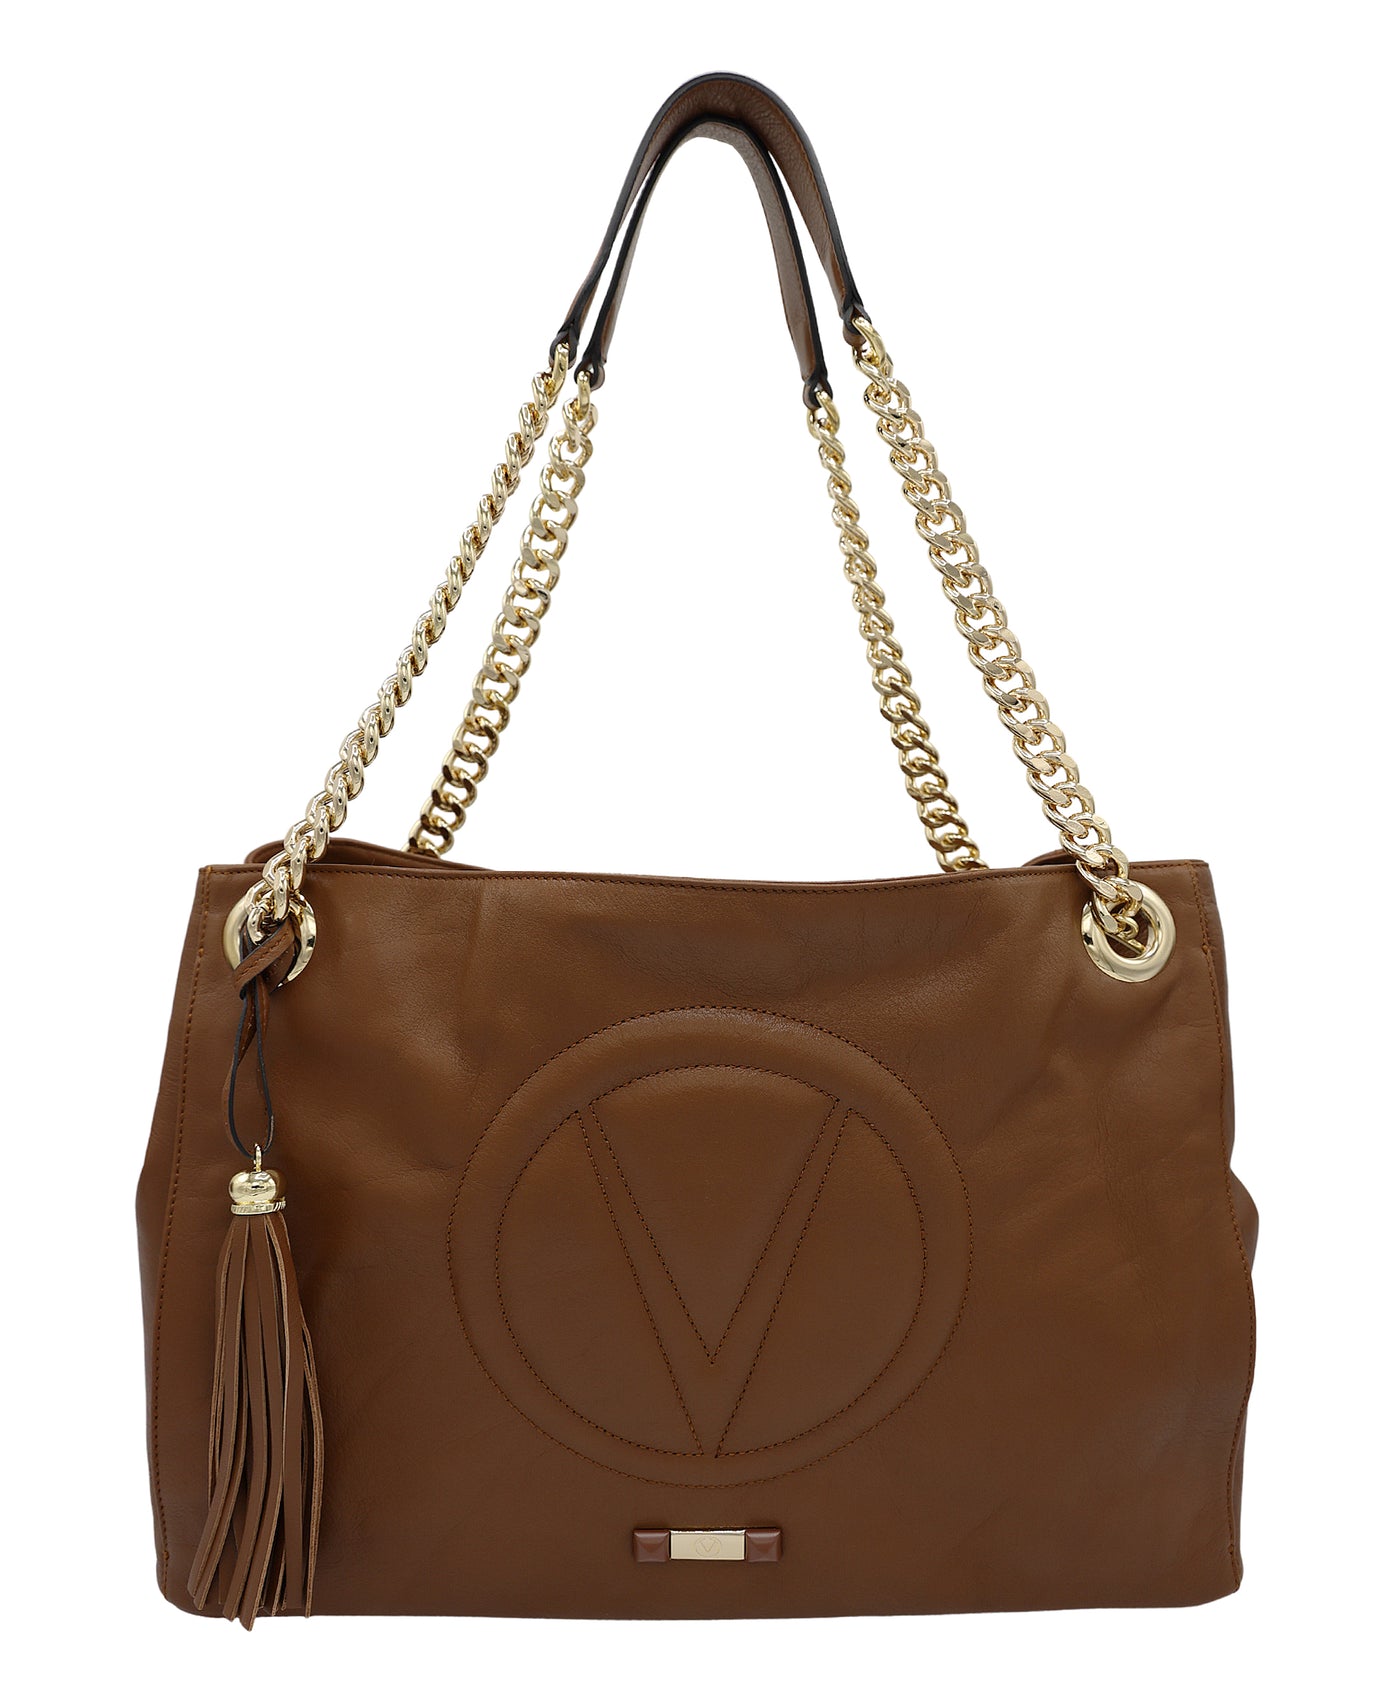 Leather Tote Bag w/ Embossed Logo image 1